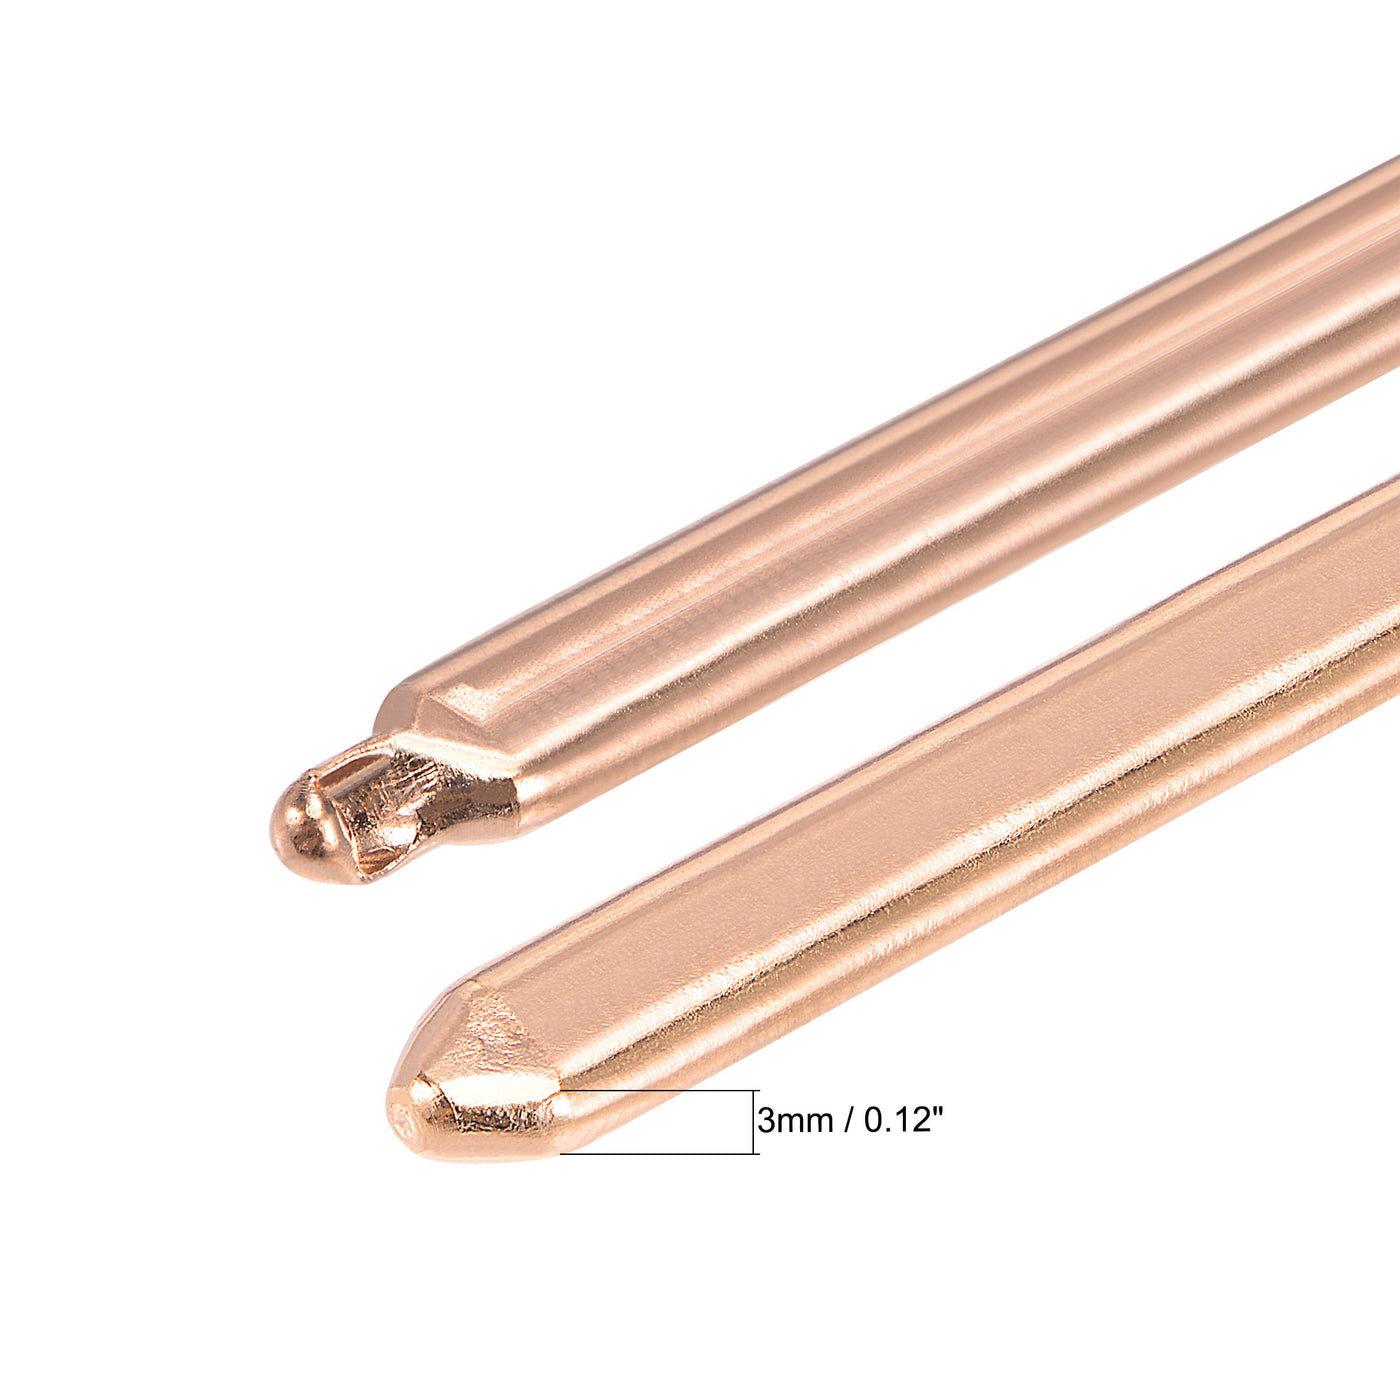 uxcell Uxcell Copper Flat Heat Pipe for Cooling Laptop CPU GPU Heatsink 120mm x 7mm x 3mm